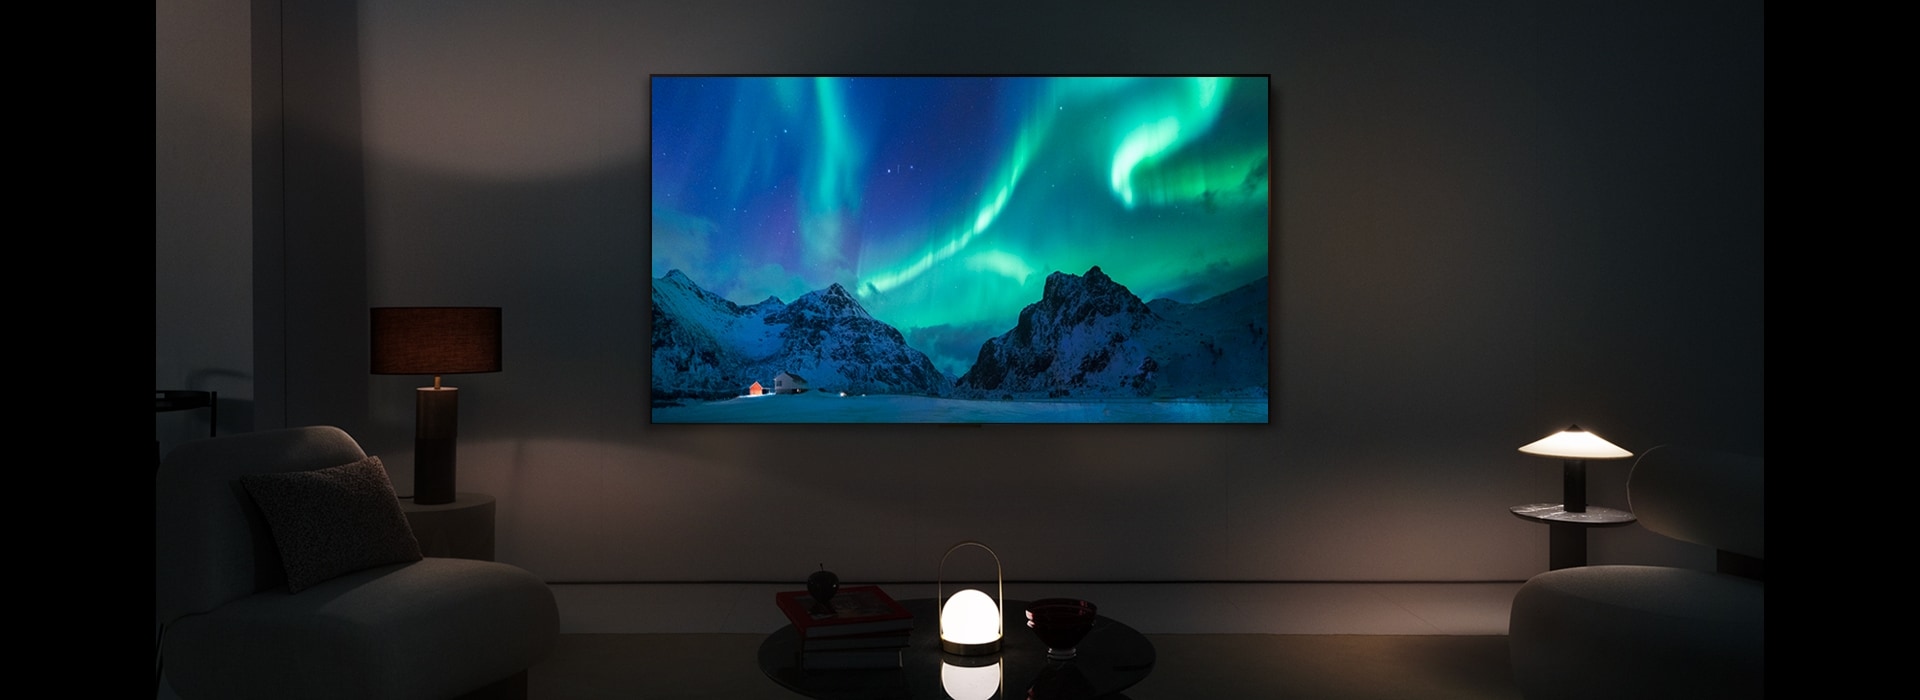 An image of an LG OLED TV and LG Soundbar in a modern living space in nighttime. The image of the aurora borealis is displayed with the ideal brightness levels.